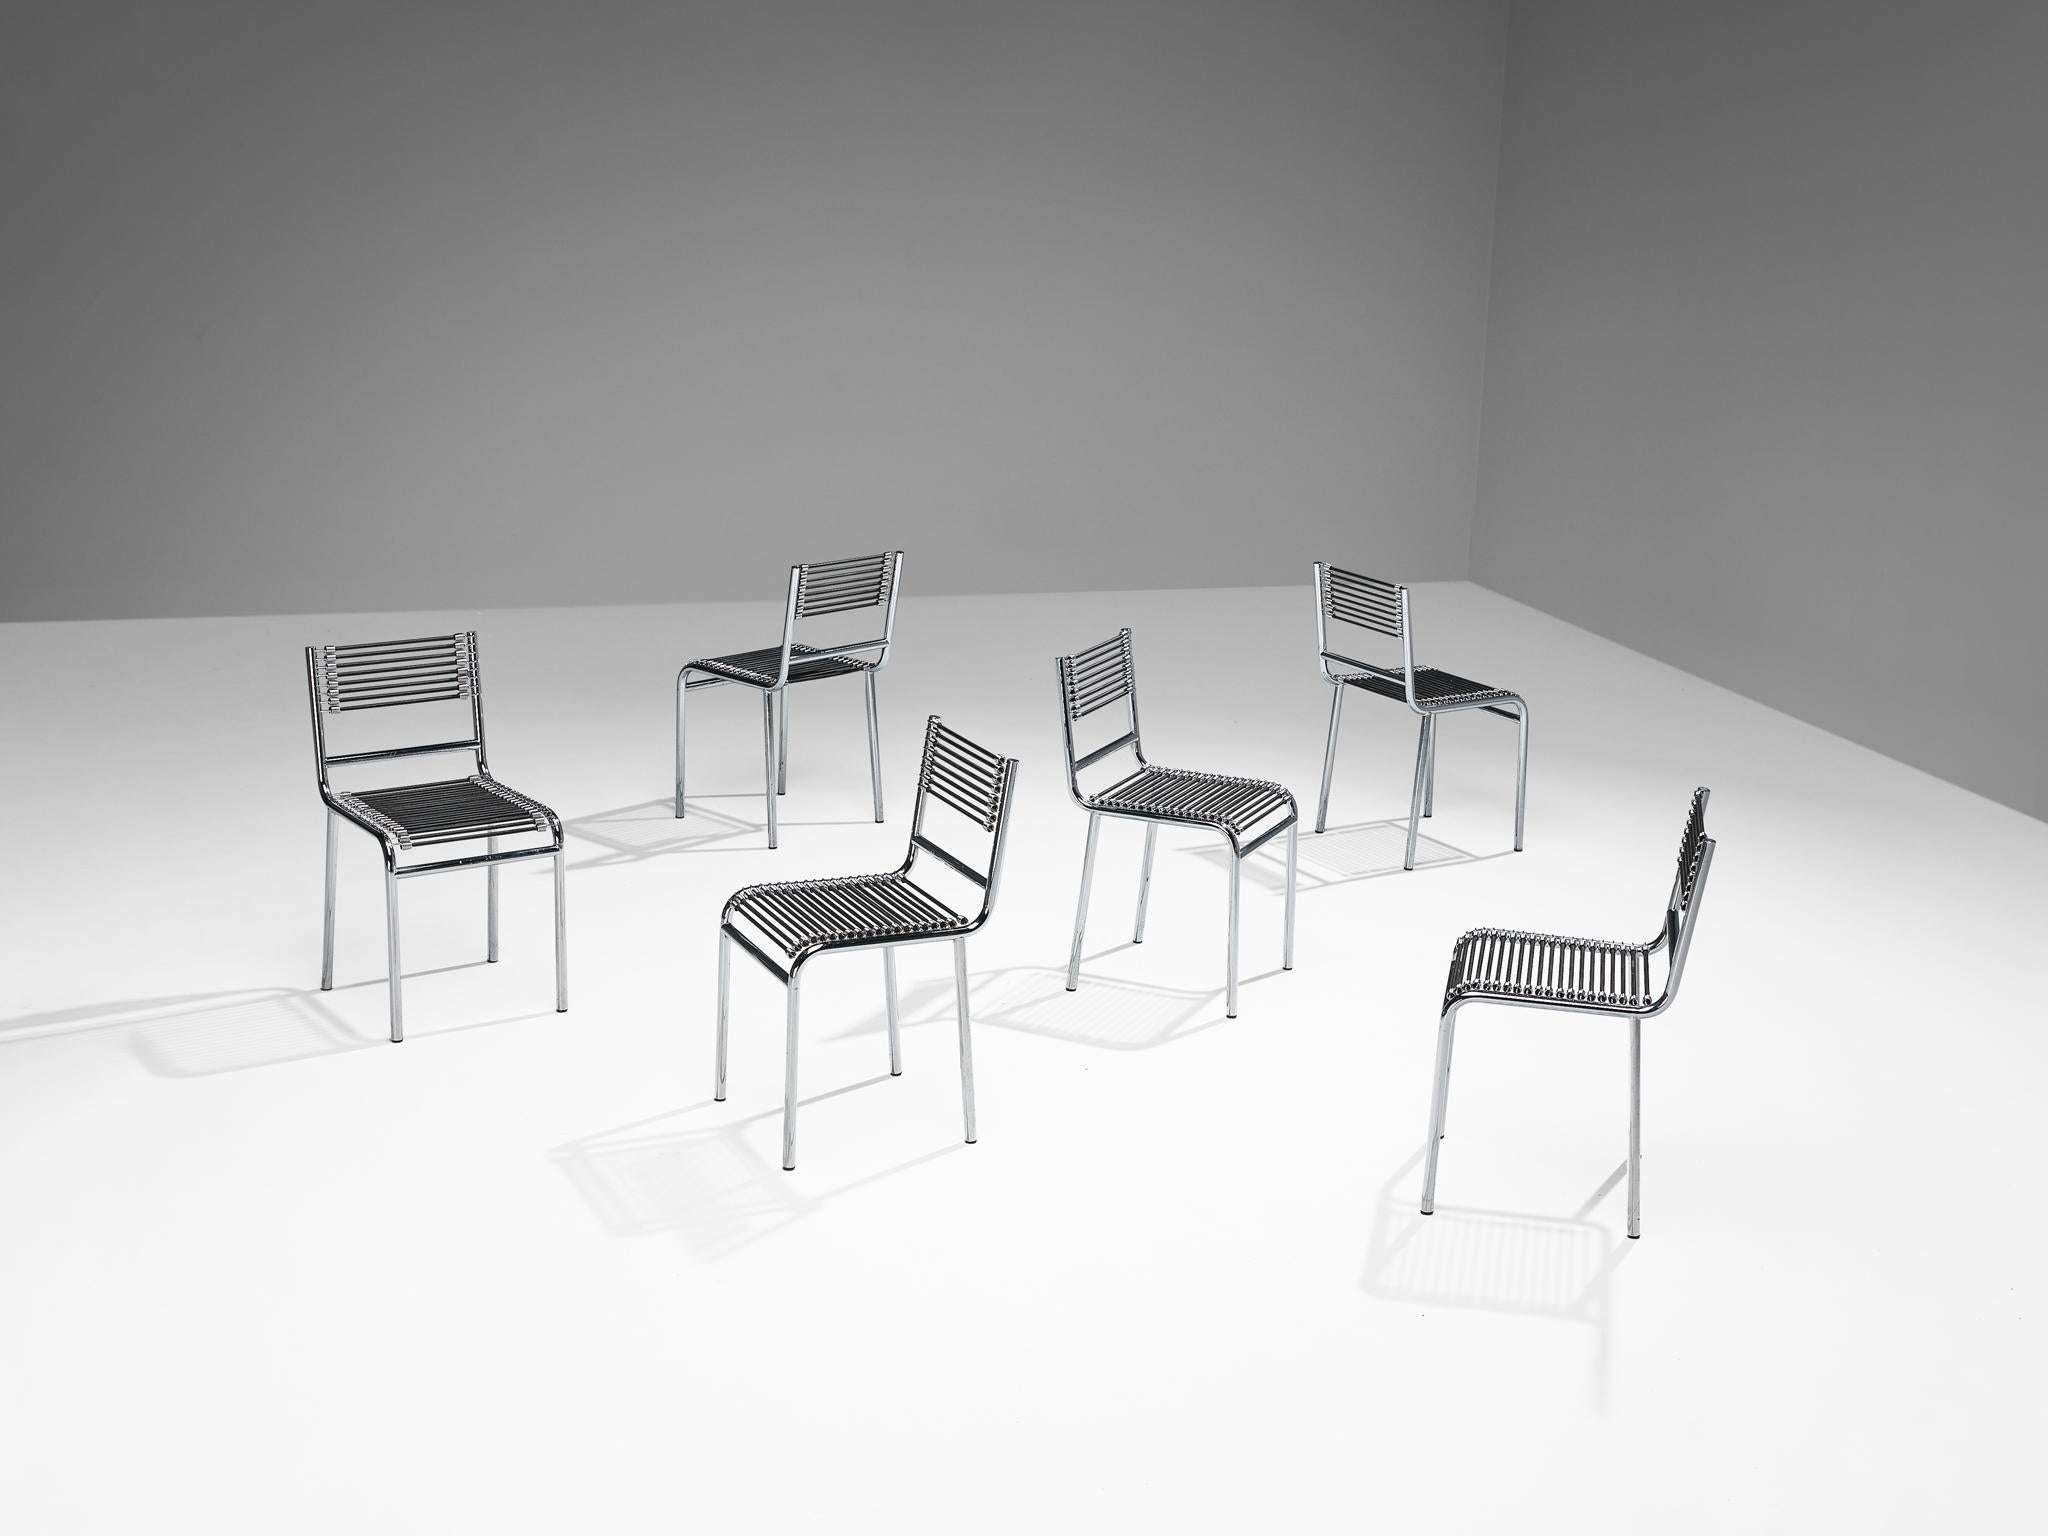 René Herbst, set of six 'Sandows' chairs, model '101', chrome-plated steel, elastic rope, France, design 1928, produced, 1970s.

The 'Sandows' chair epitomizes the industrial advancements of the twenties, featuring a tubular steel construction